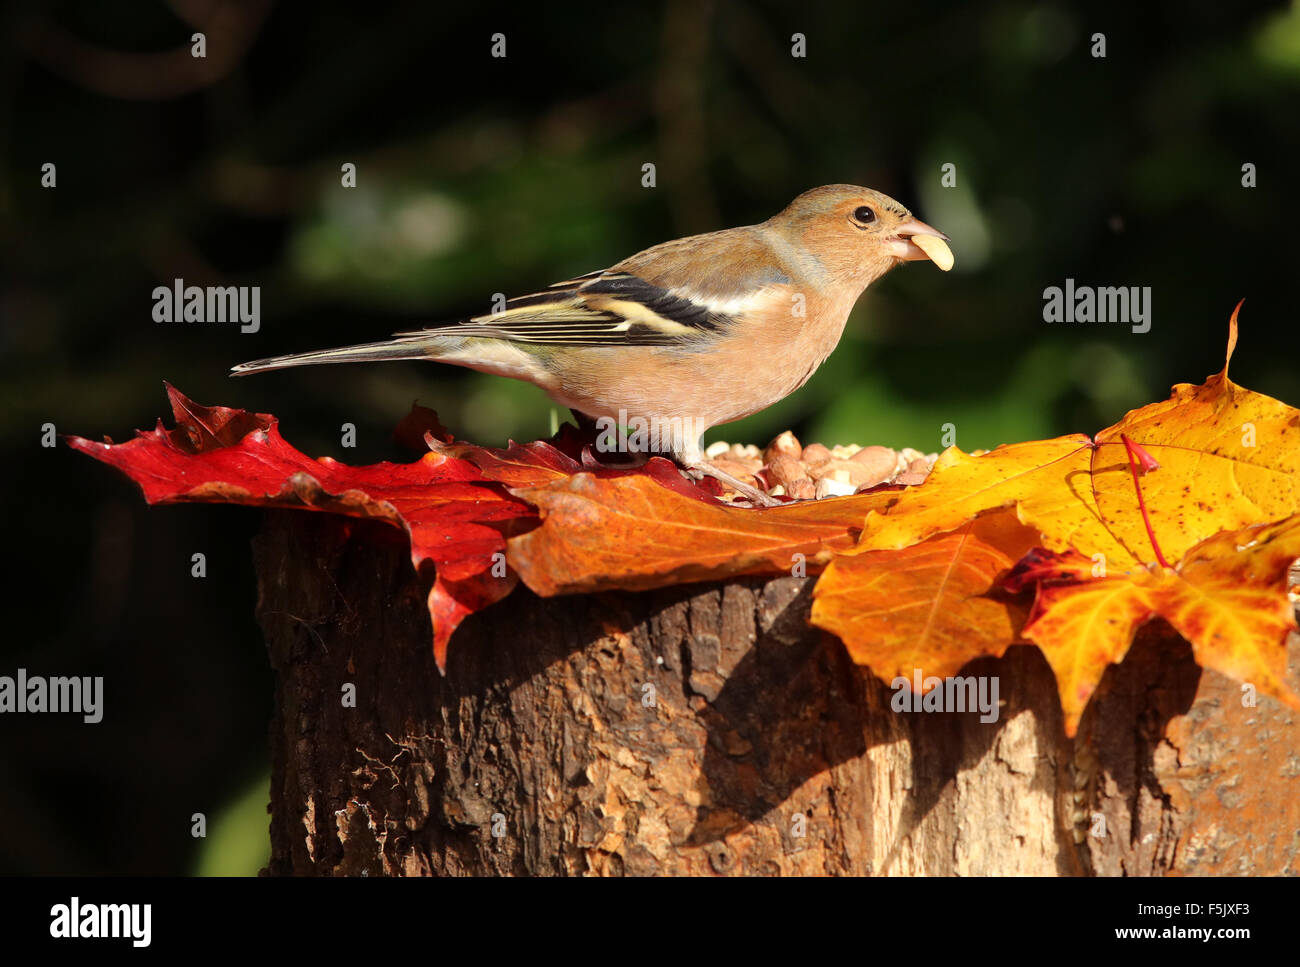 Close up of a male Chaffinch on a tree stump with autumn leaves Stock Photo